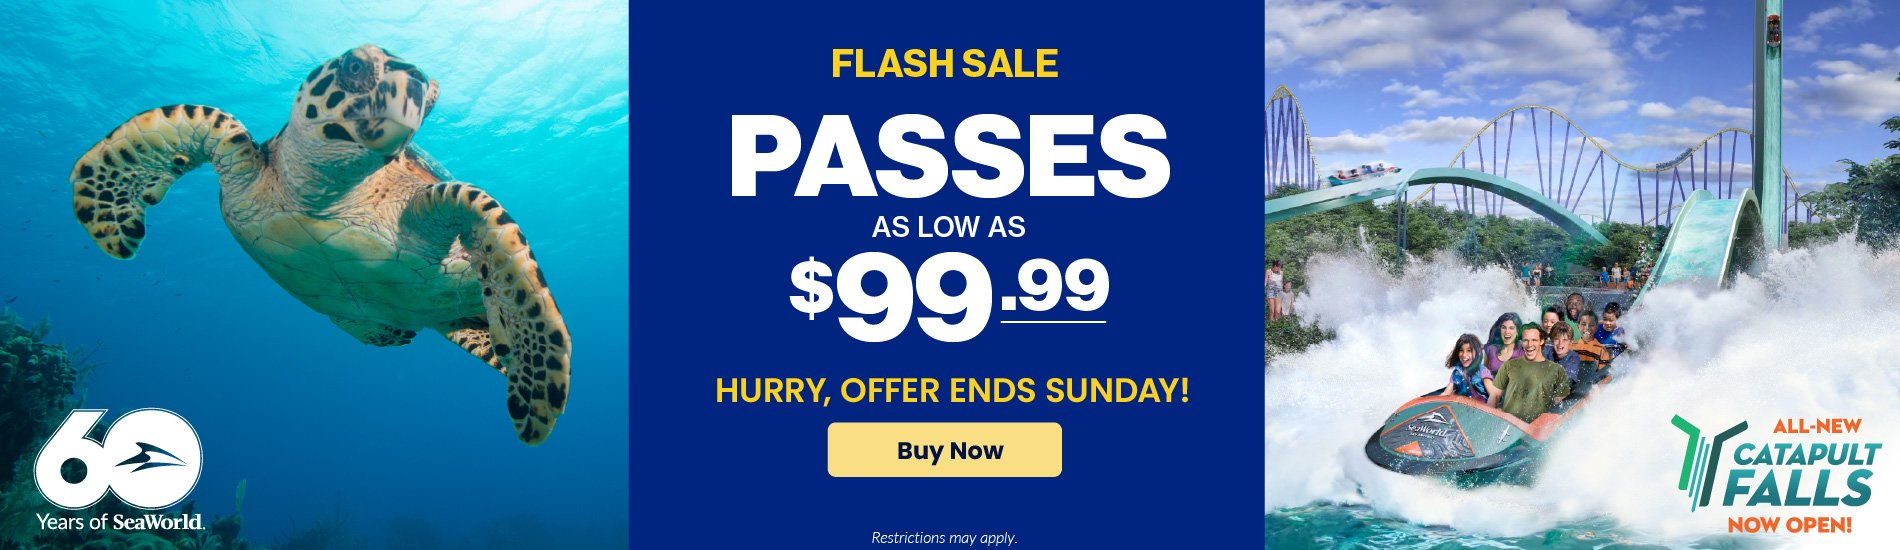 Flash Sale: Passes as low as $99.99